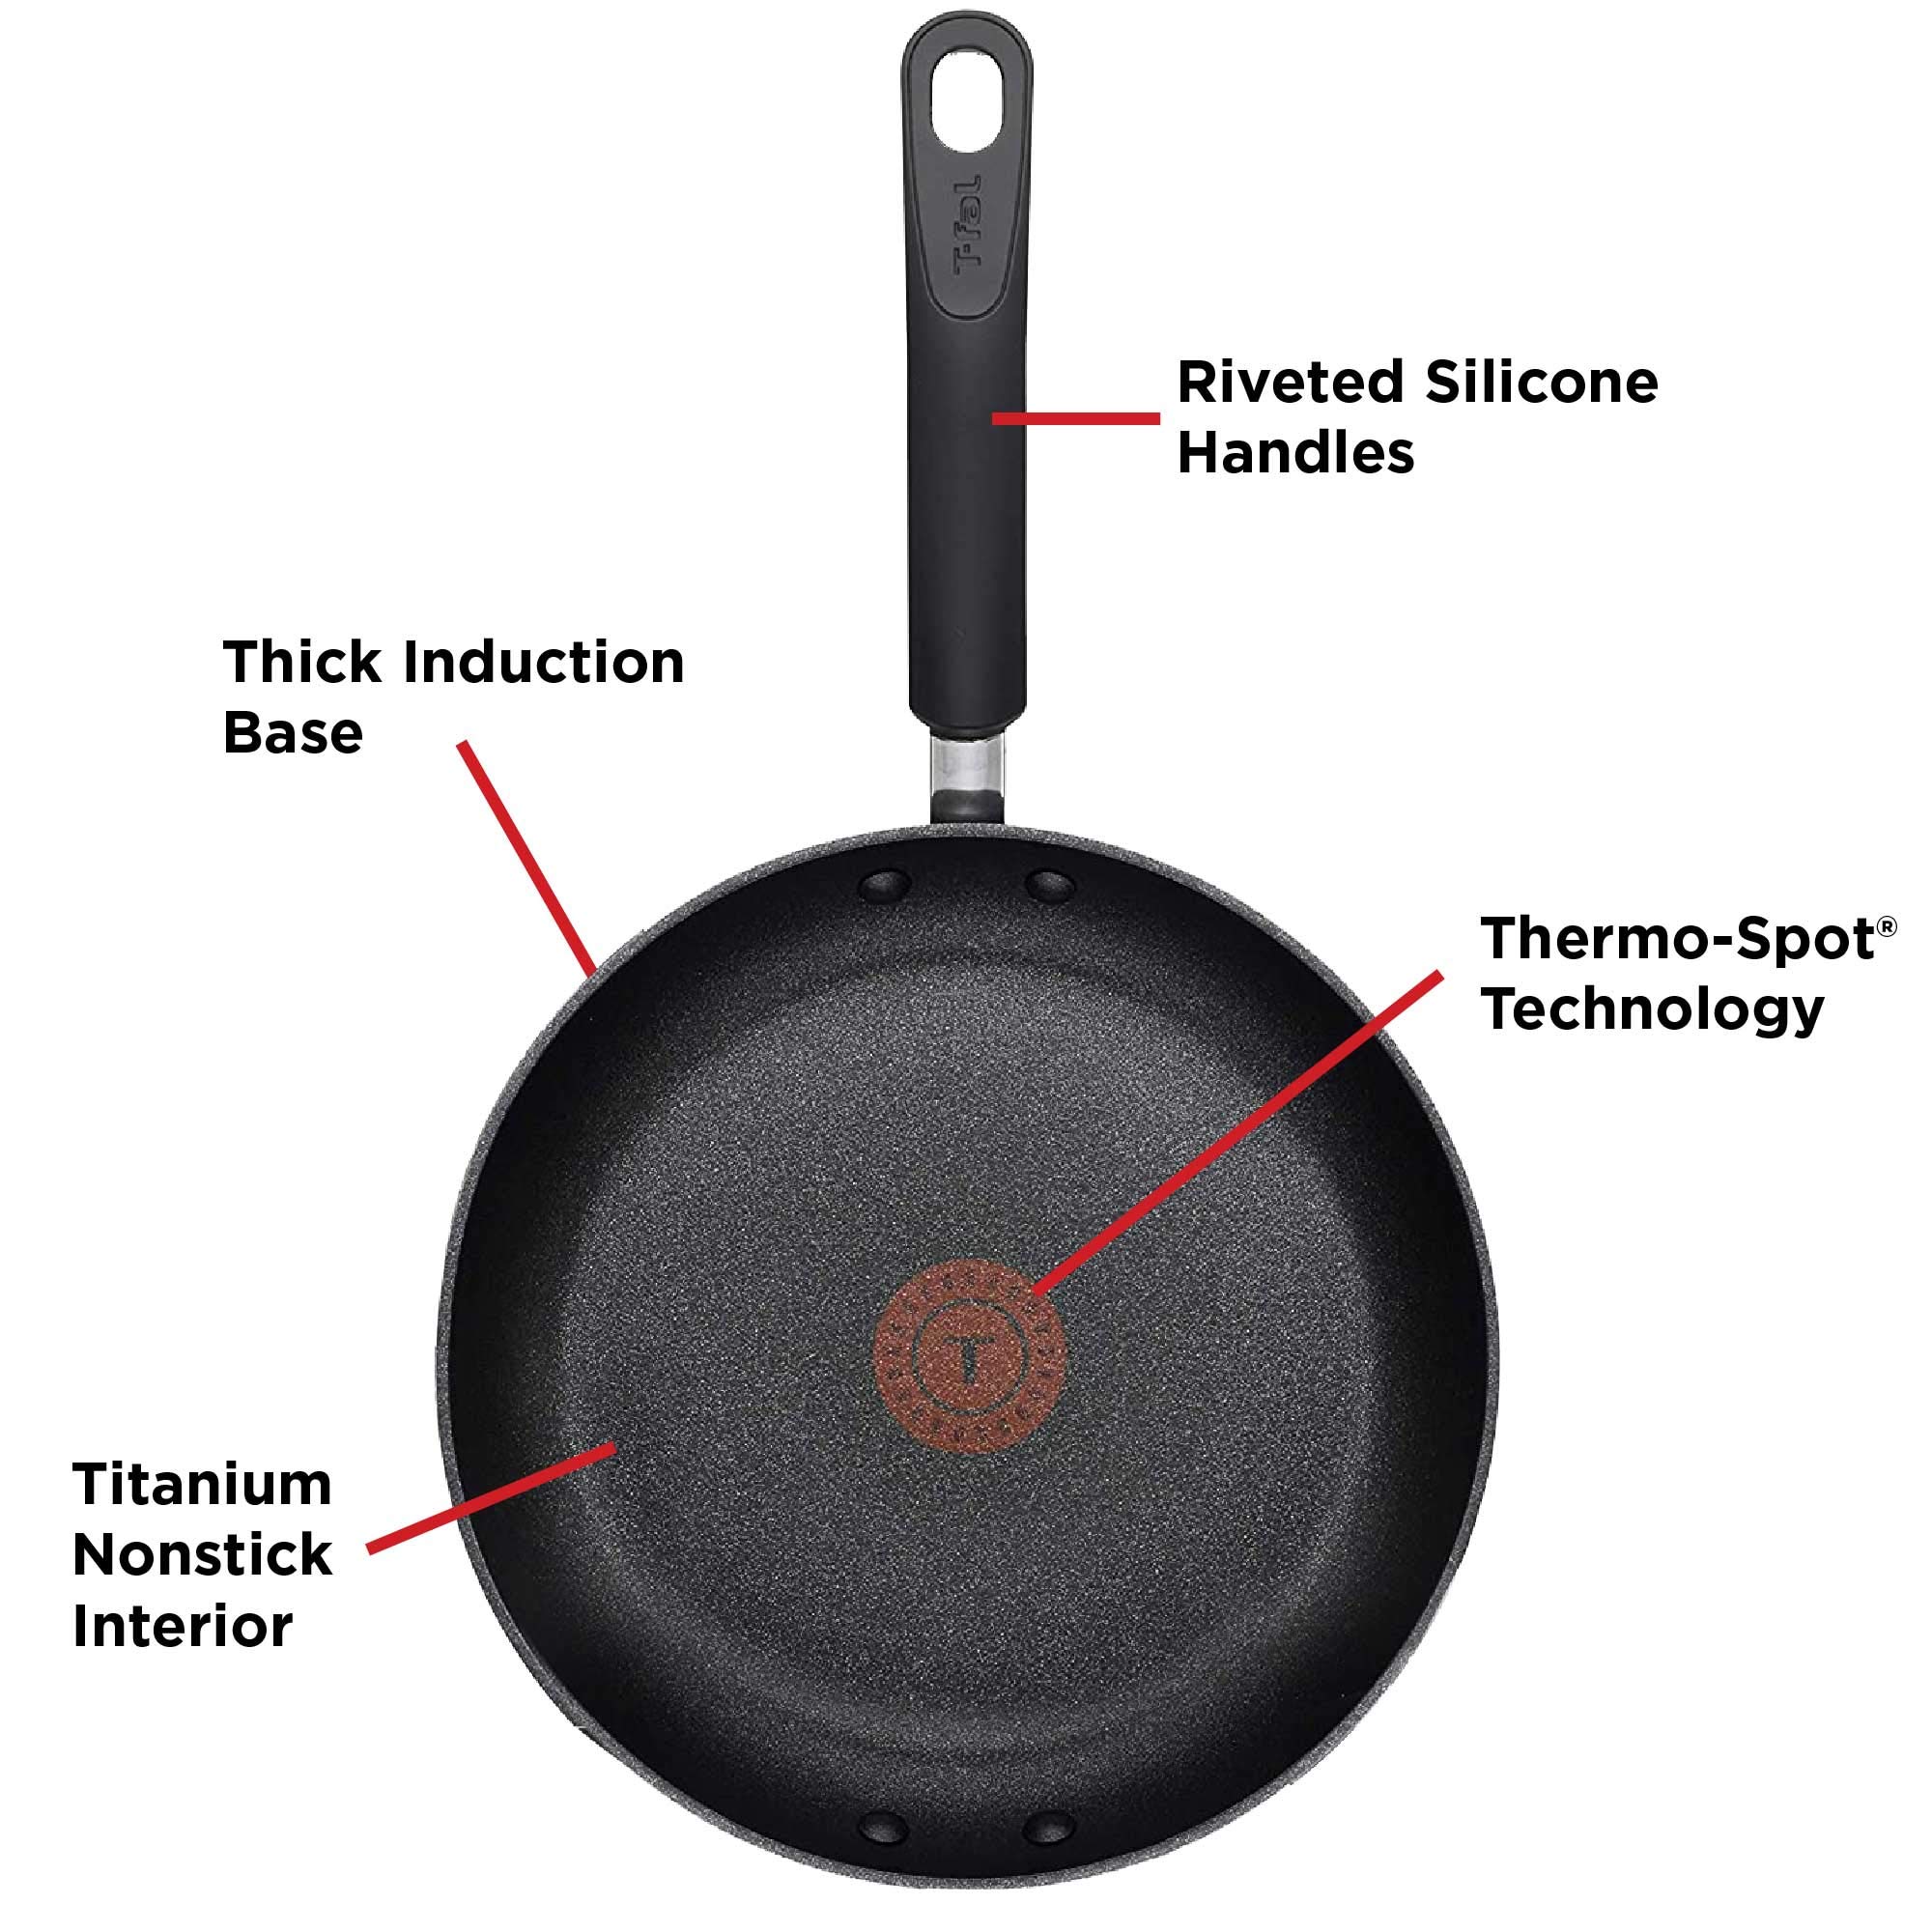 T-fal Experience Nonstick Fry Pan 12.5 inch Induction Cookware, Pots and Pans, Dishwasher Safe Black